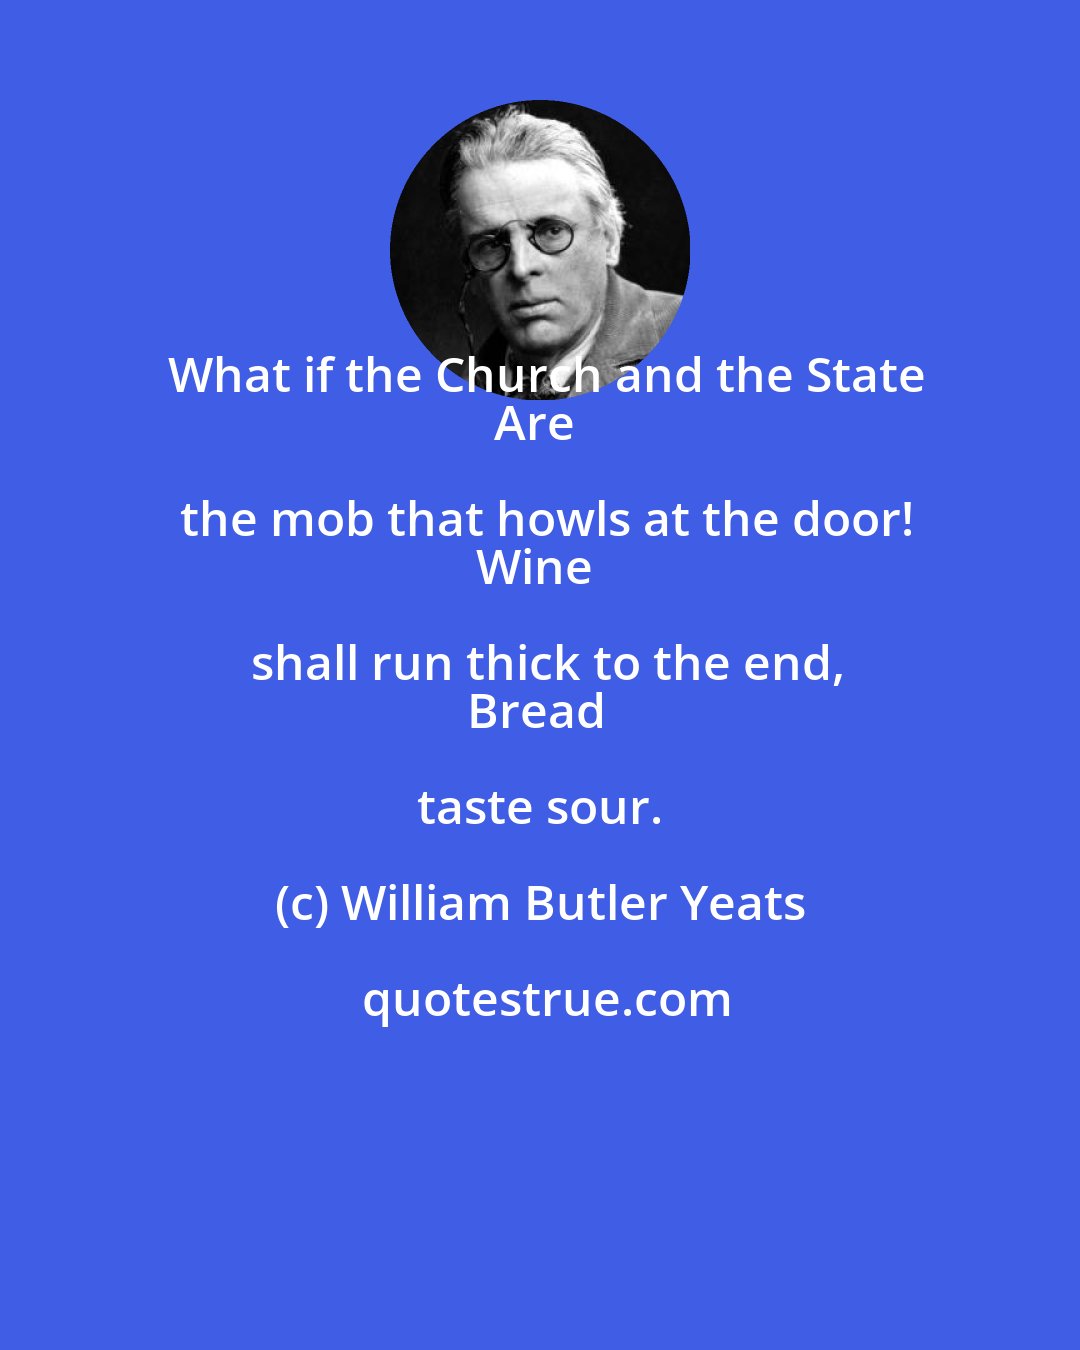 William Butler Yeats: What if the Church and the State
Are the mob that howls at the door!
Wine shall run thick to the end,
Bread taste sour.